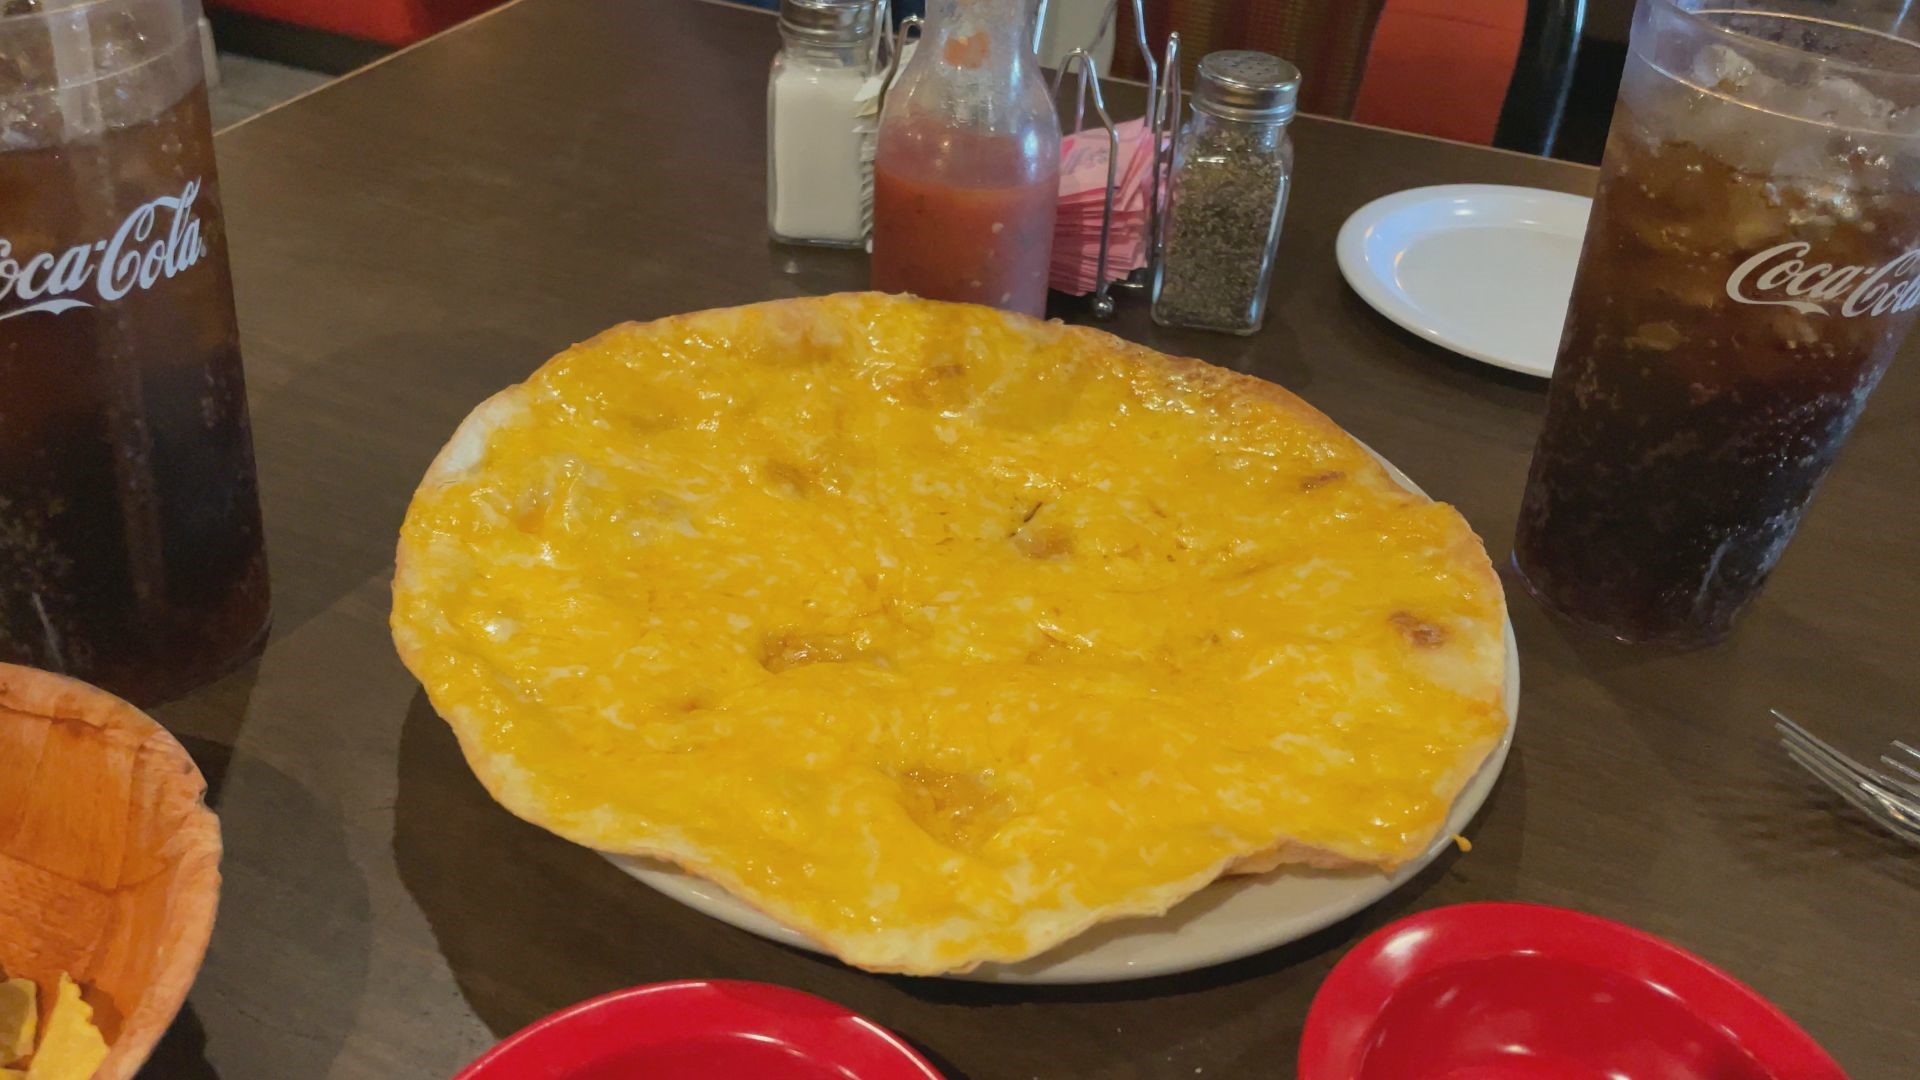 The cheese crisp is an appetizer found at some Mexican restaurants in Arizona.